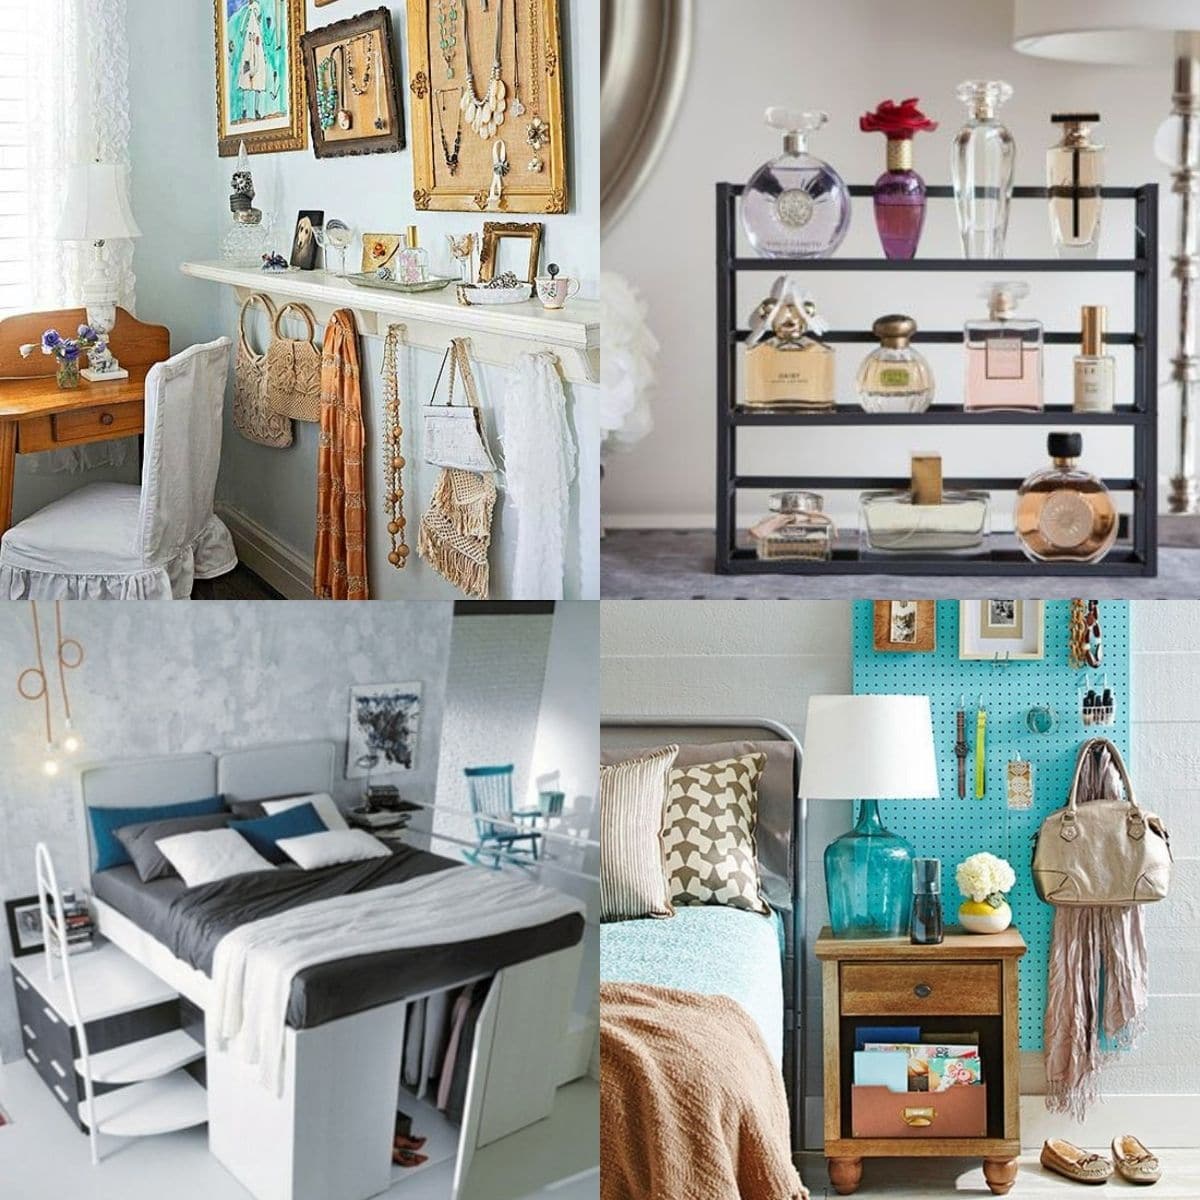 Increase storage in your small rooms with the fun hacks.

Keep your room both organized and stylish. 😉

#Storage #StorageIDeas #StorageSpace #SmallRooms #SmallRoomStorage #SmallRoomStorageIDeas

 LocalInfoForYou.com/154304/small-r…